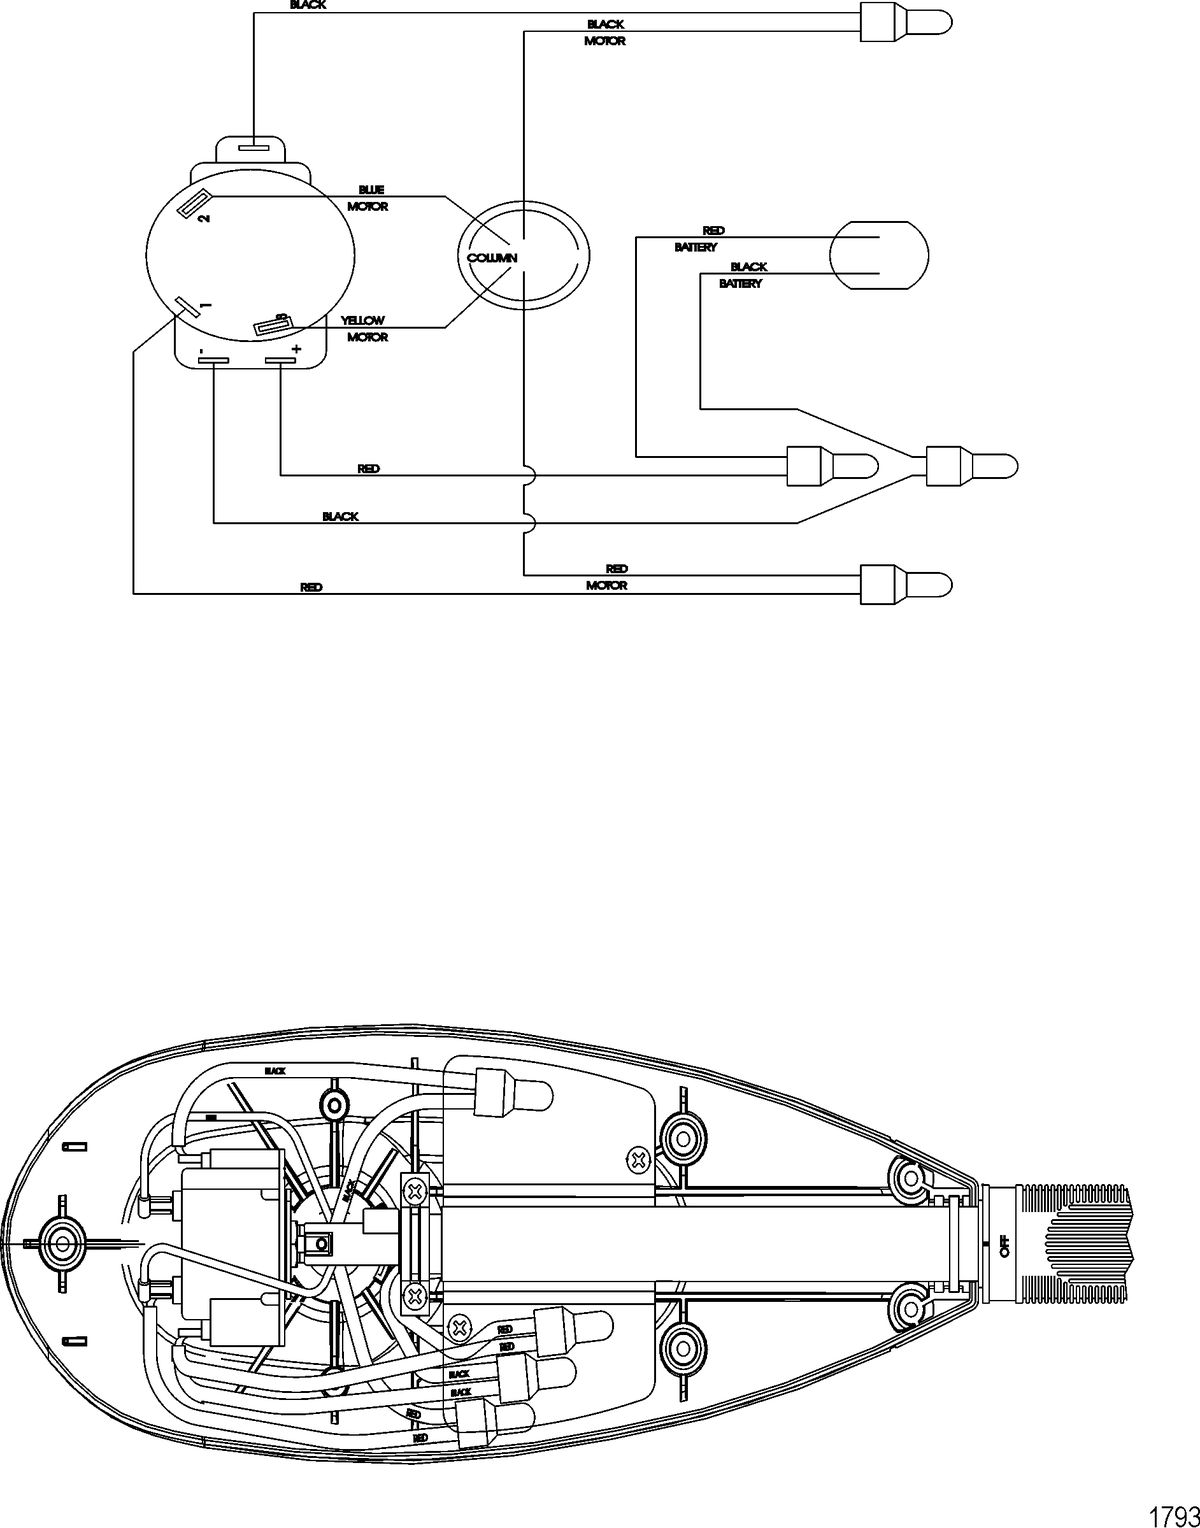 TROLLING MOTOR MOTORGUIDE THRUSTER SERIES Wire Diagram(Model T46) (Without Quick Connect)